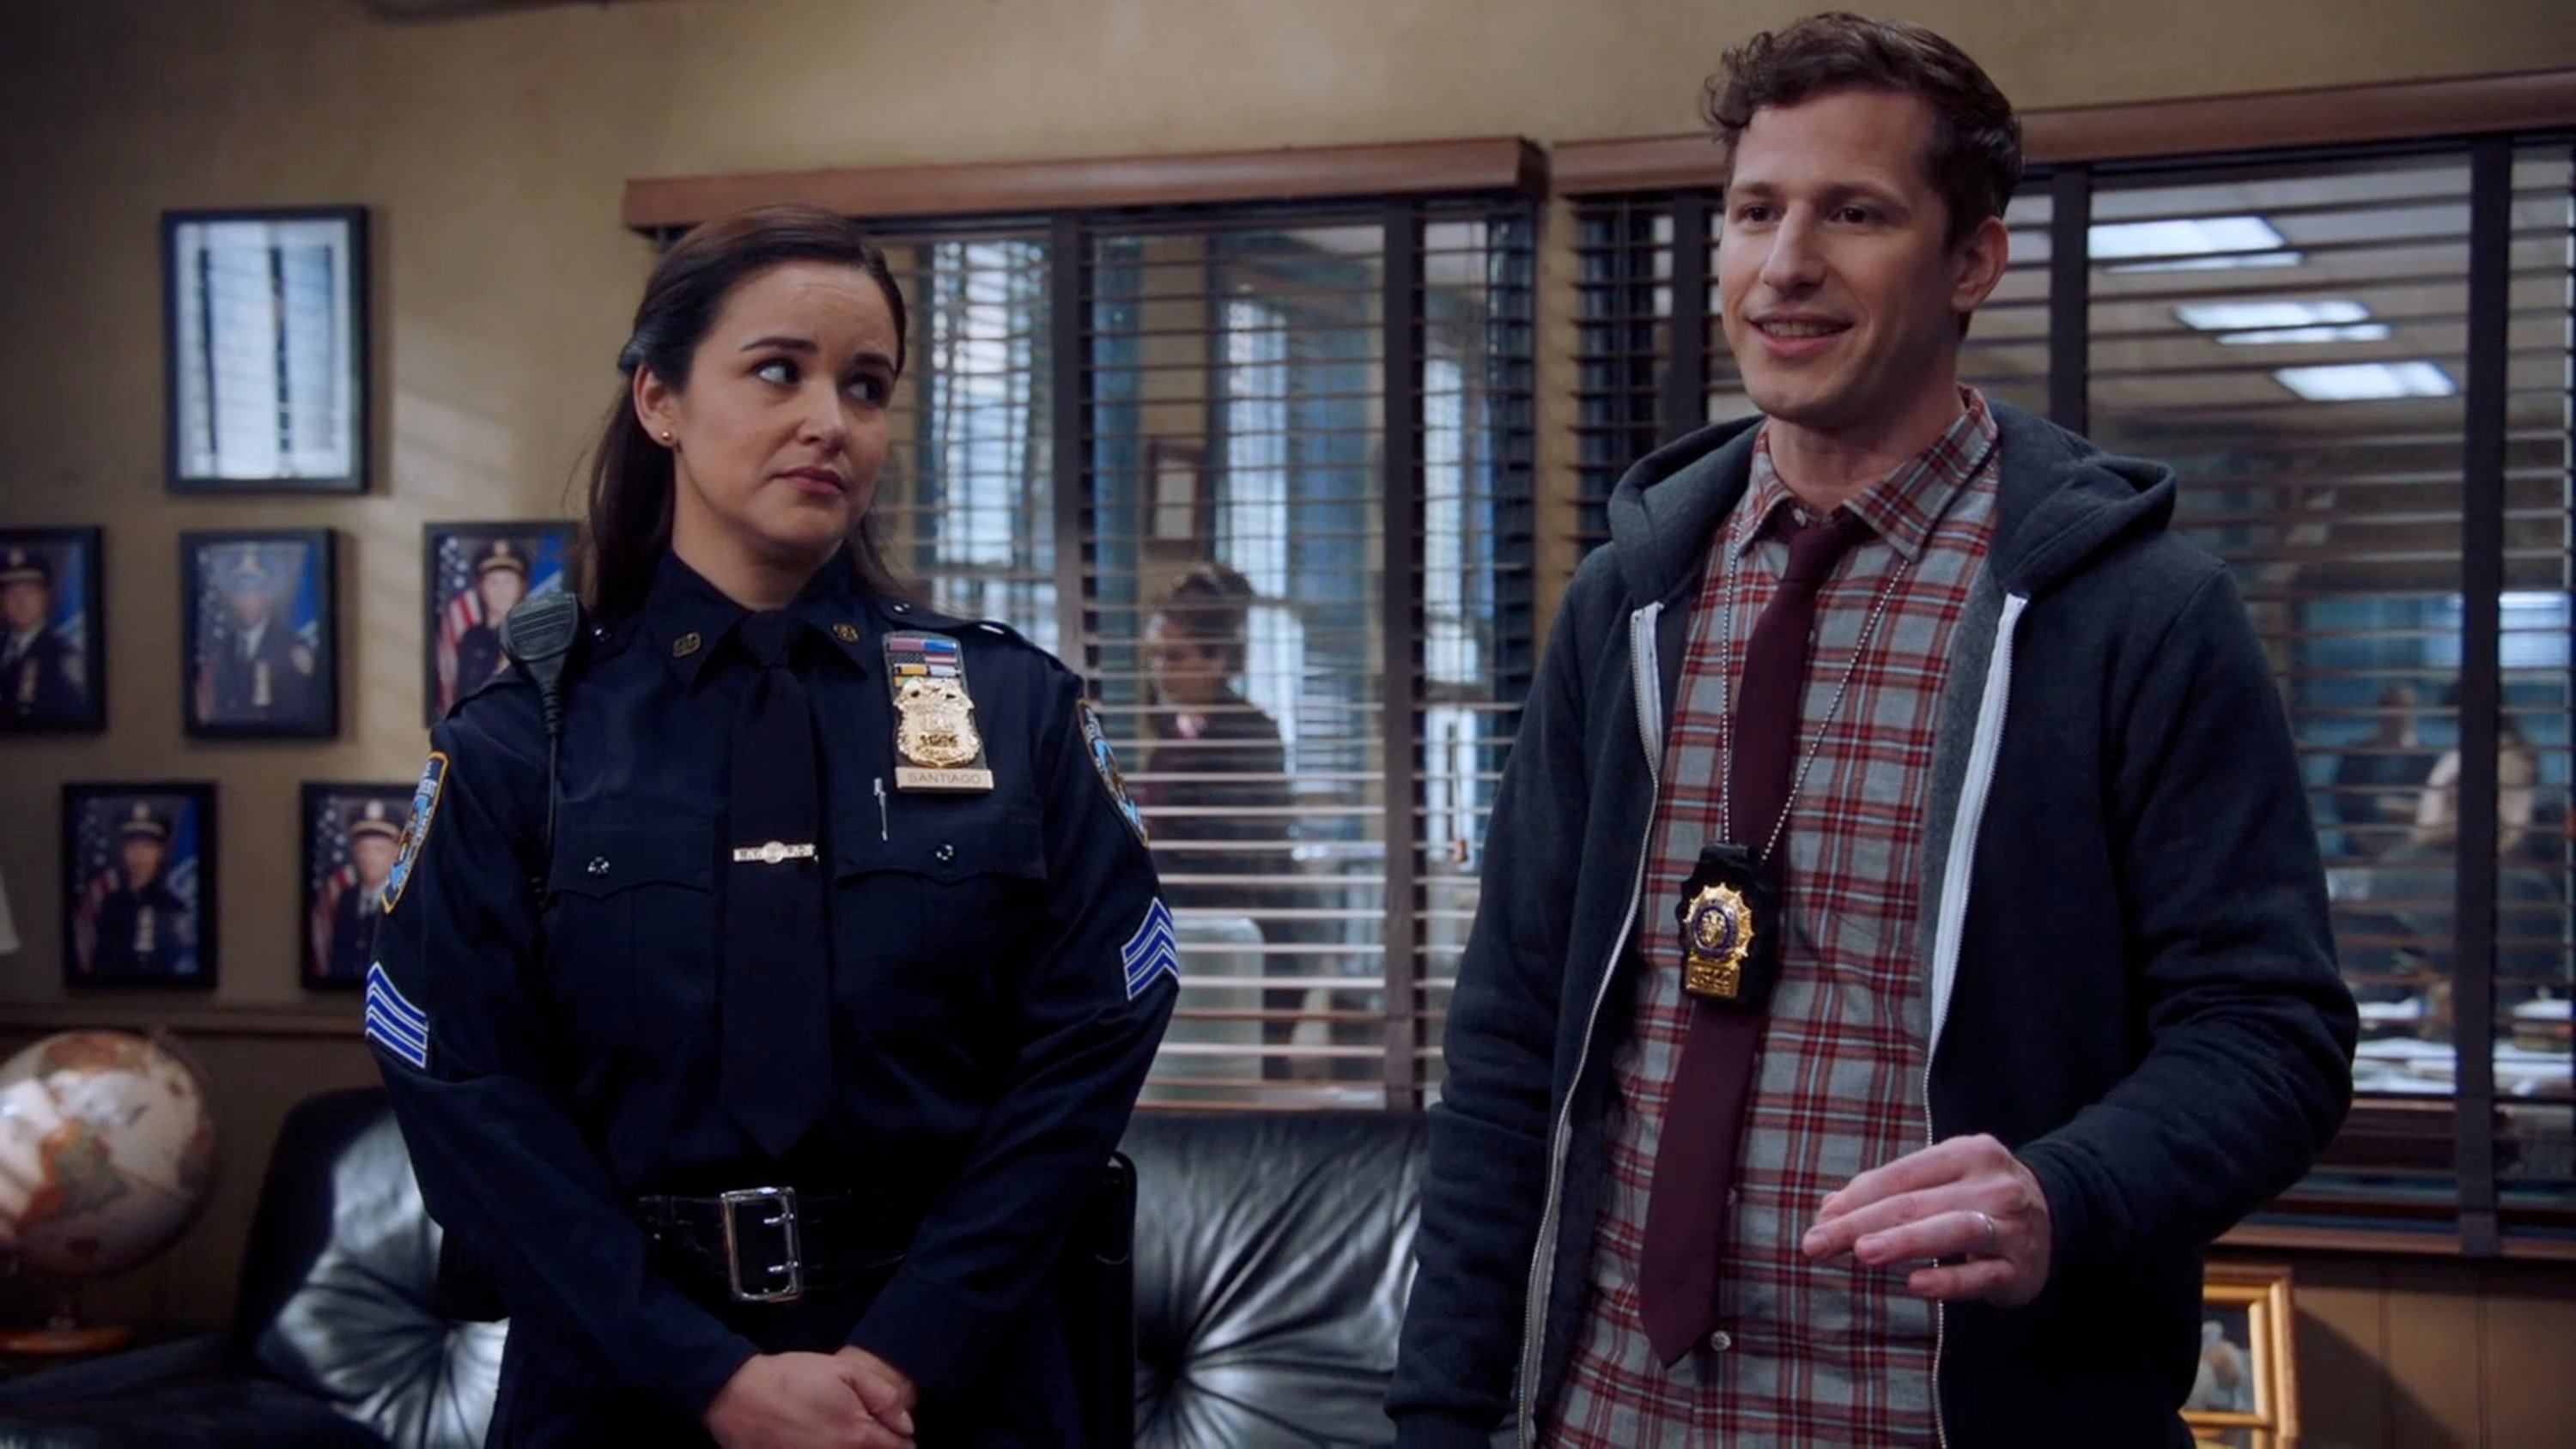 Amy Santiago and Jake Peralta stand together in 'Brooklyn Nine-Nine'